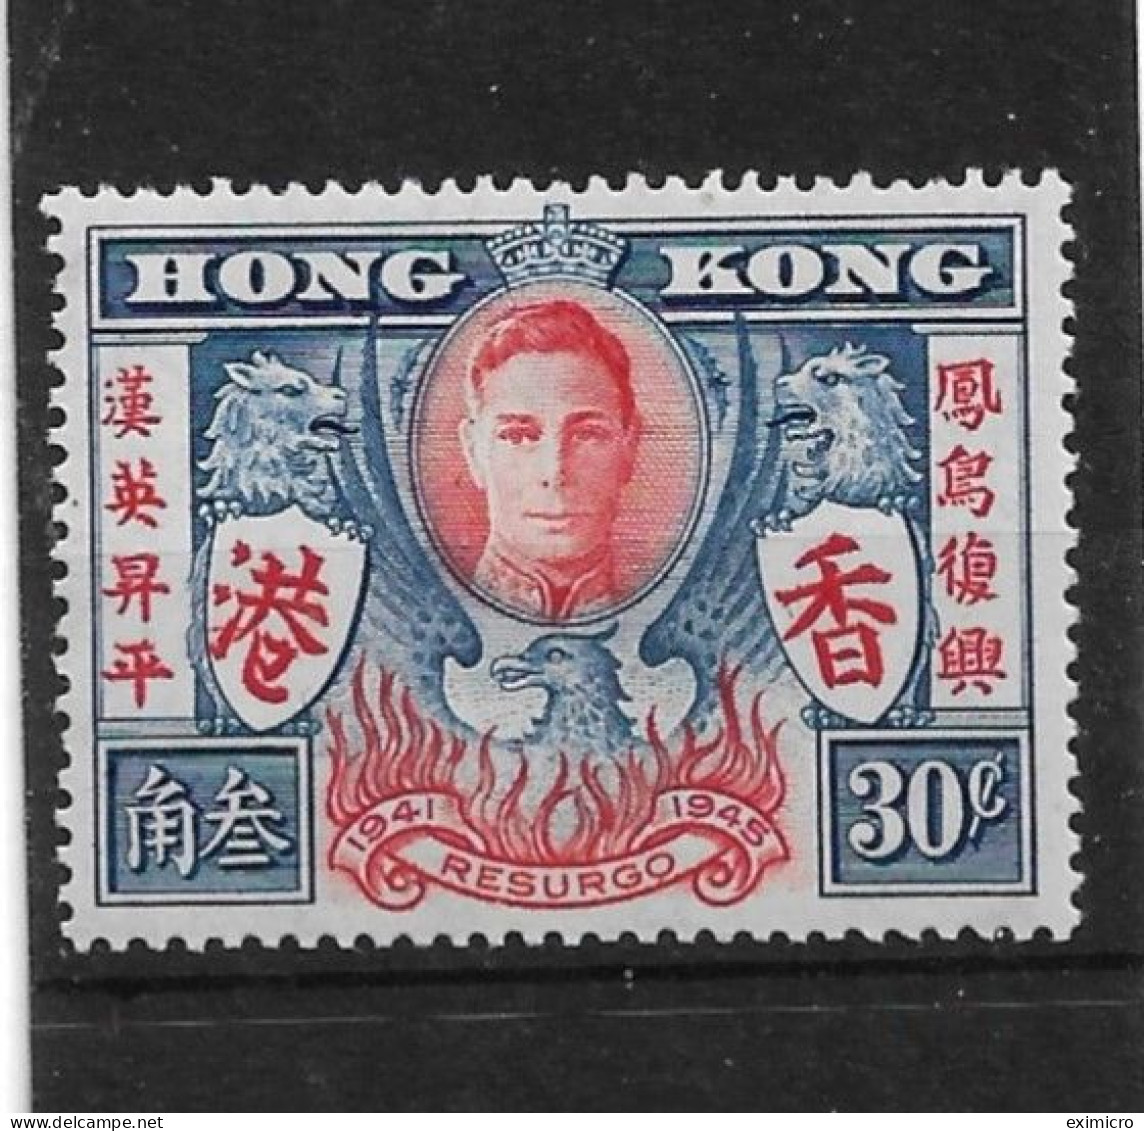 HONG KONG 1946 VICTORY 30c SG 169a 'EXTRA STROKE' VARIETY MOUNTED MINT Cat £140 - Neufs